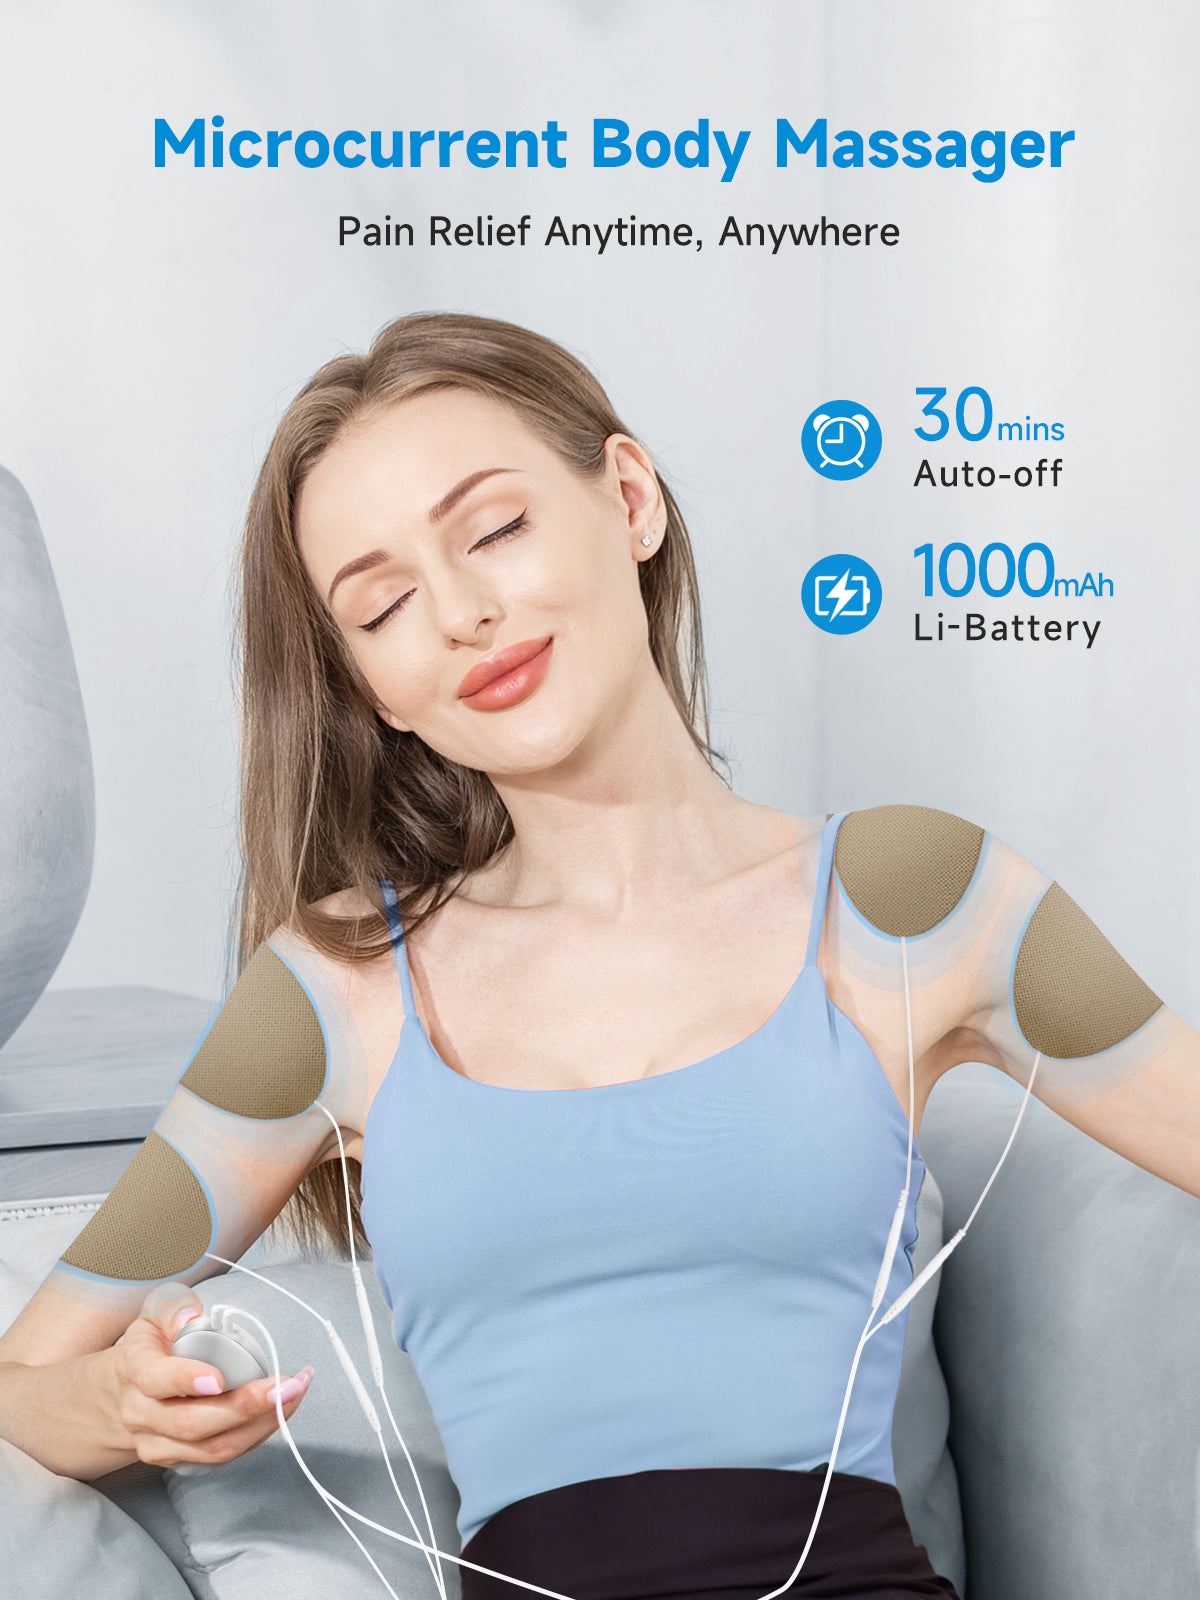 UTOV Micro Current Massager Portable Shoulder Back Neck Massager for Circulation and Pain Relief,30min auto-Off, 1000mhA Rechargeable Battery (Sliver-4 Pads)